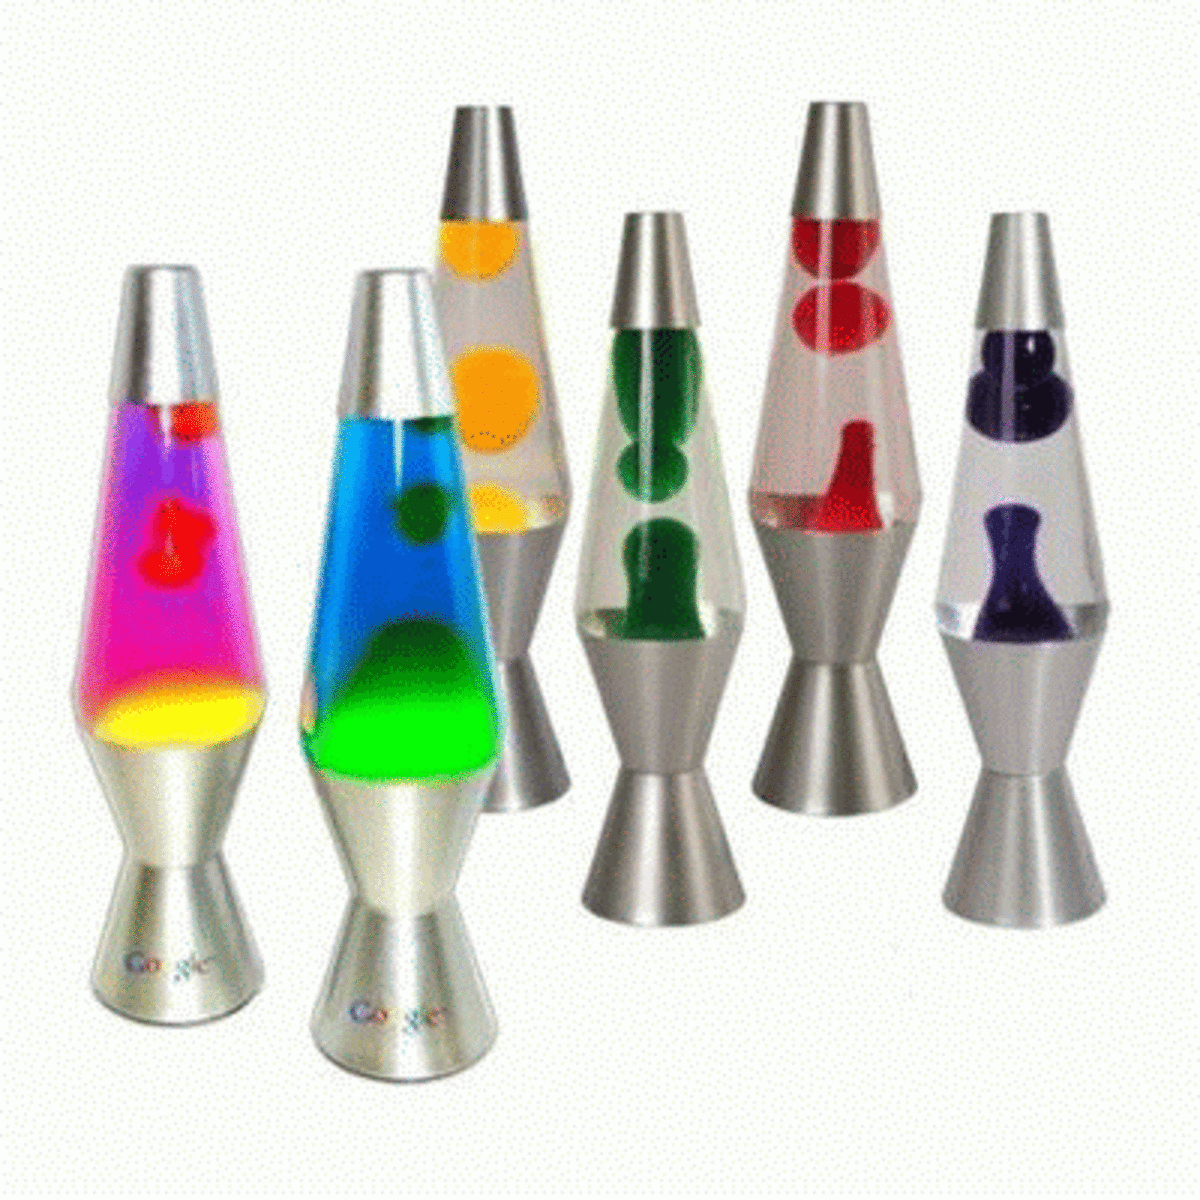 Lava Lamps come in many different shapes and sizes